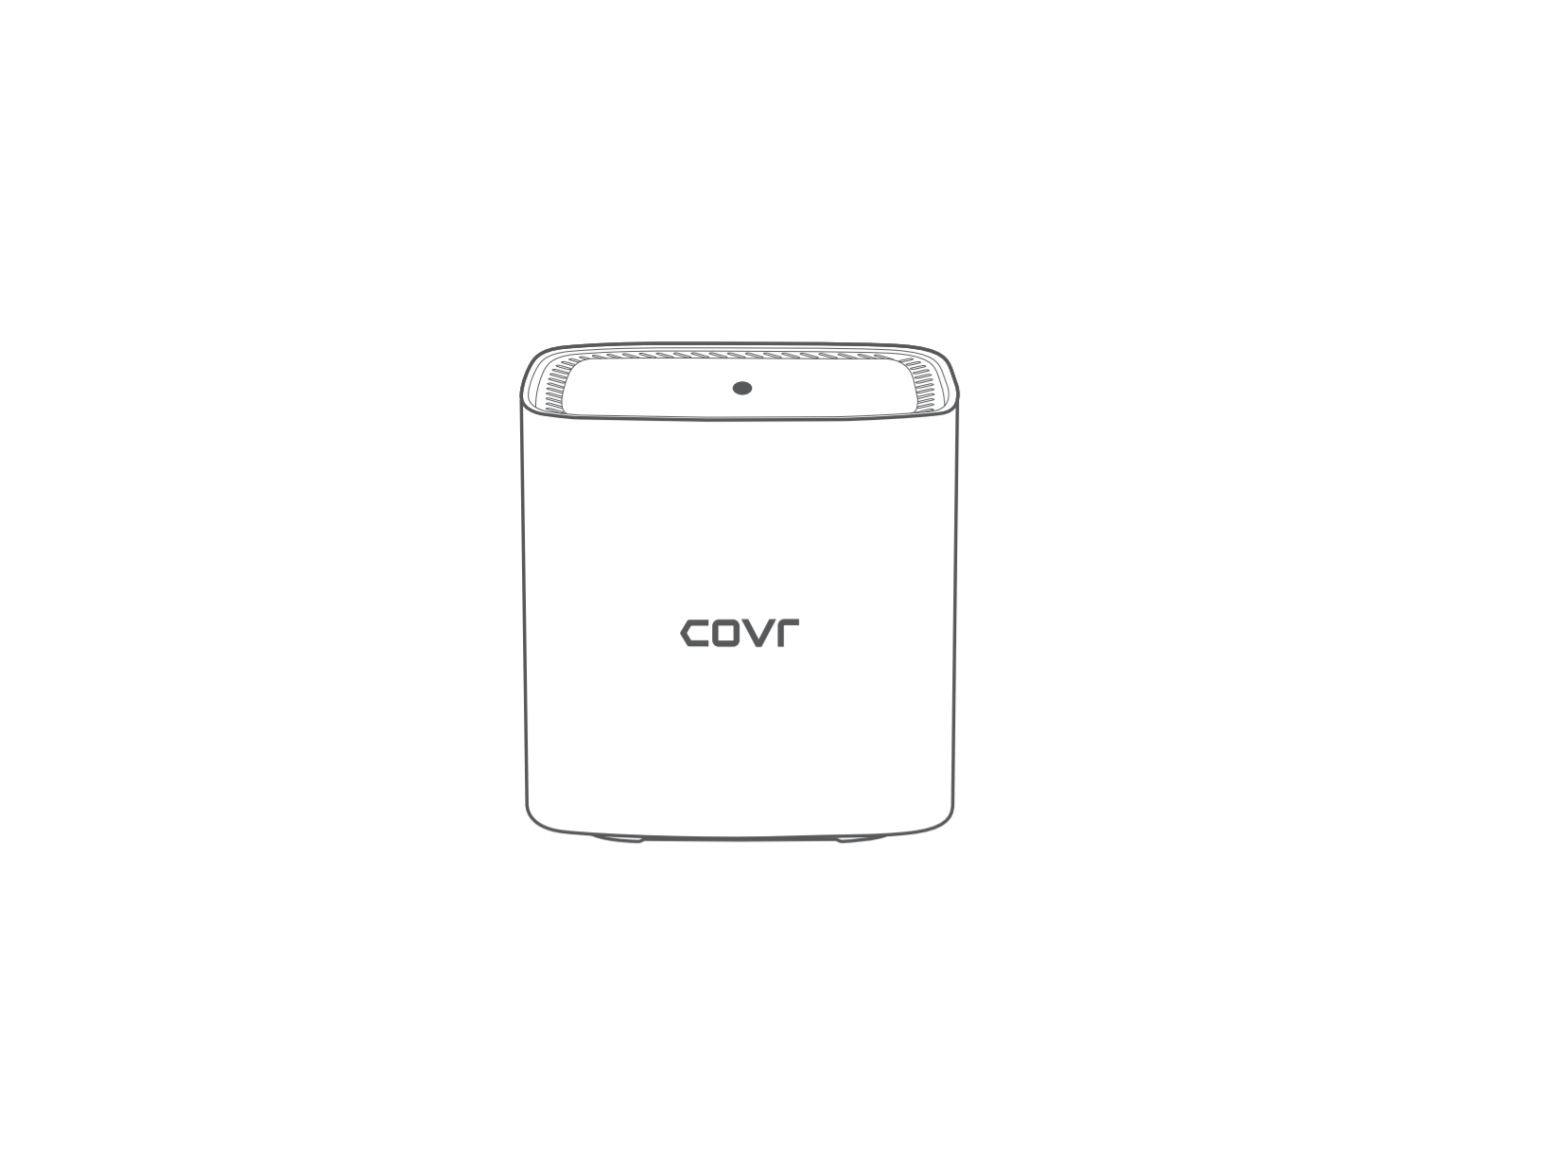 D-Link COVR-1103 AC1200 Dual Band Whole Home Mesh Wi-Fi System User Guide